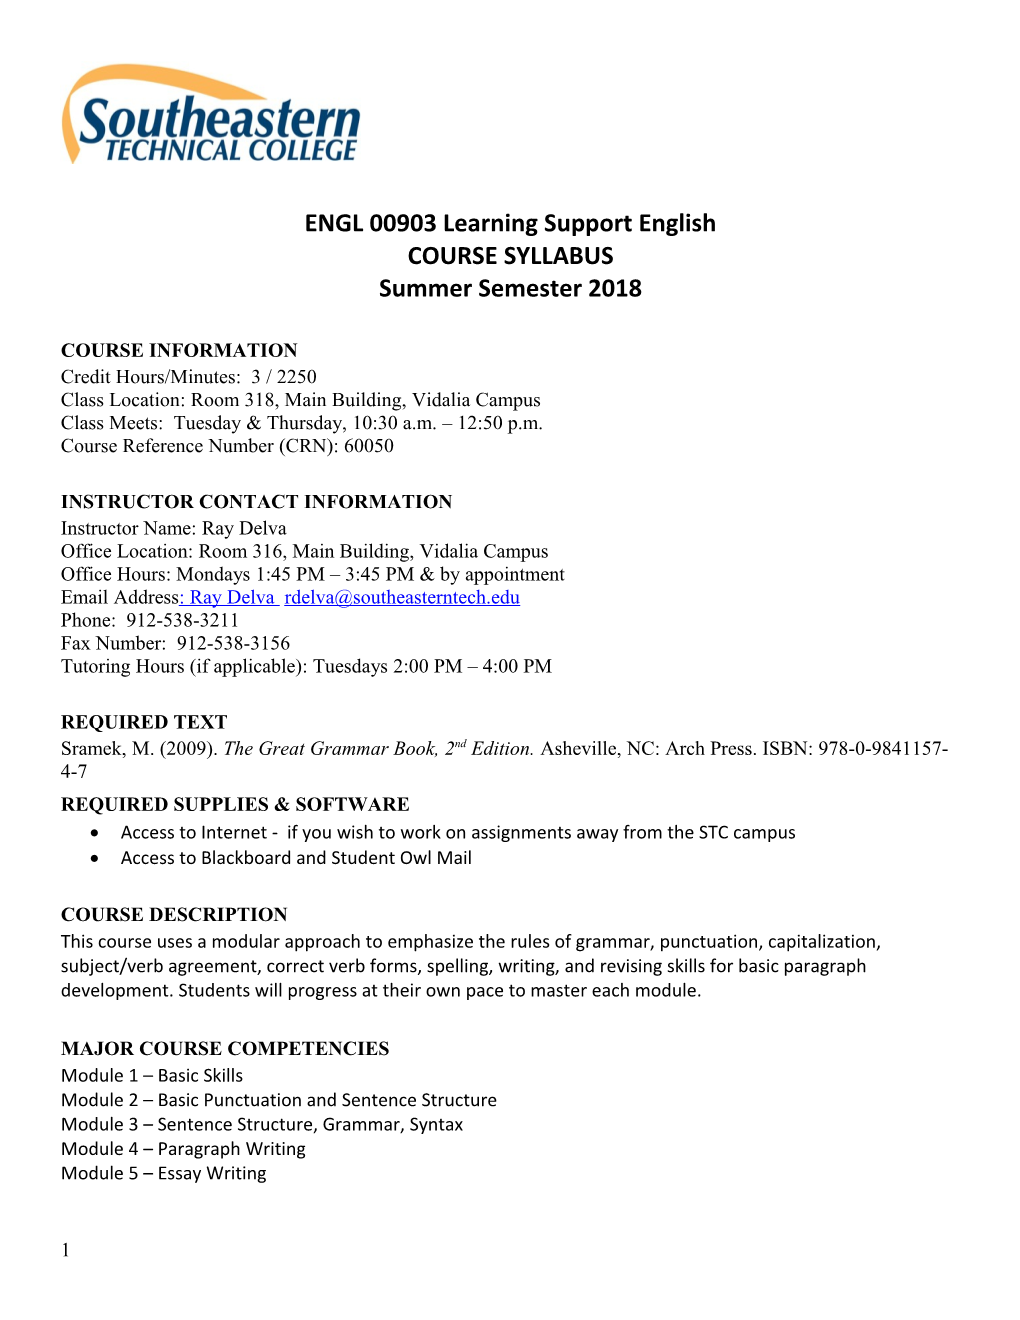 ENGL 00903 Learning Support English